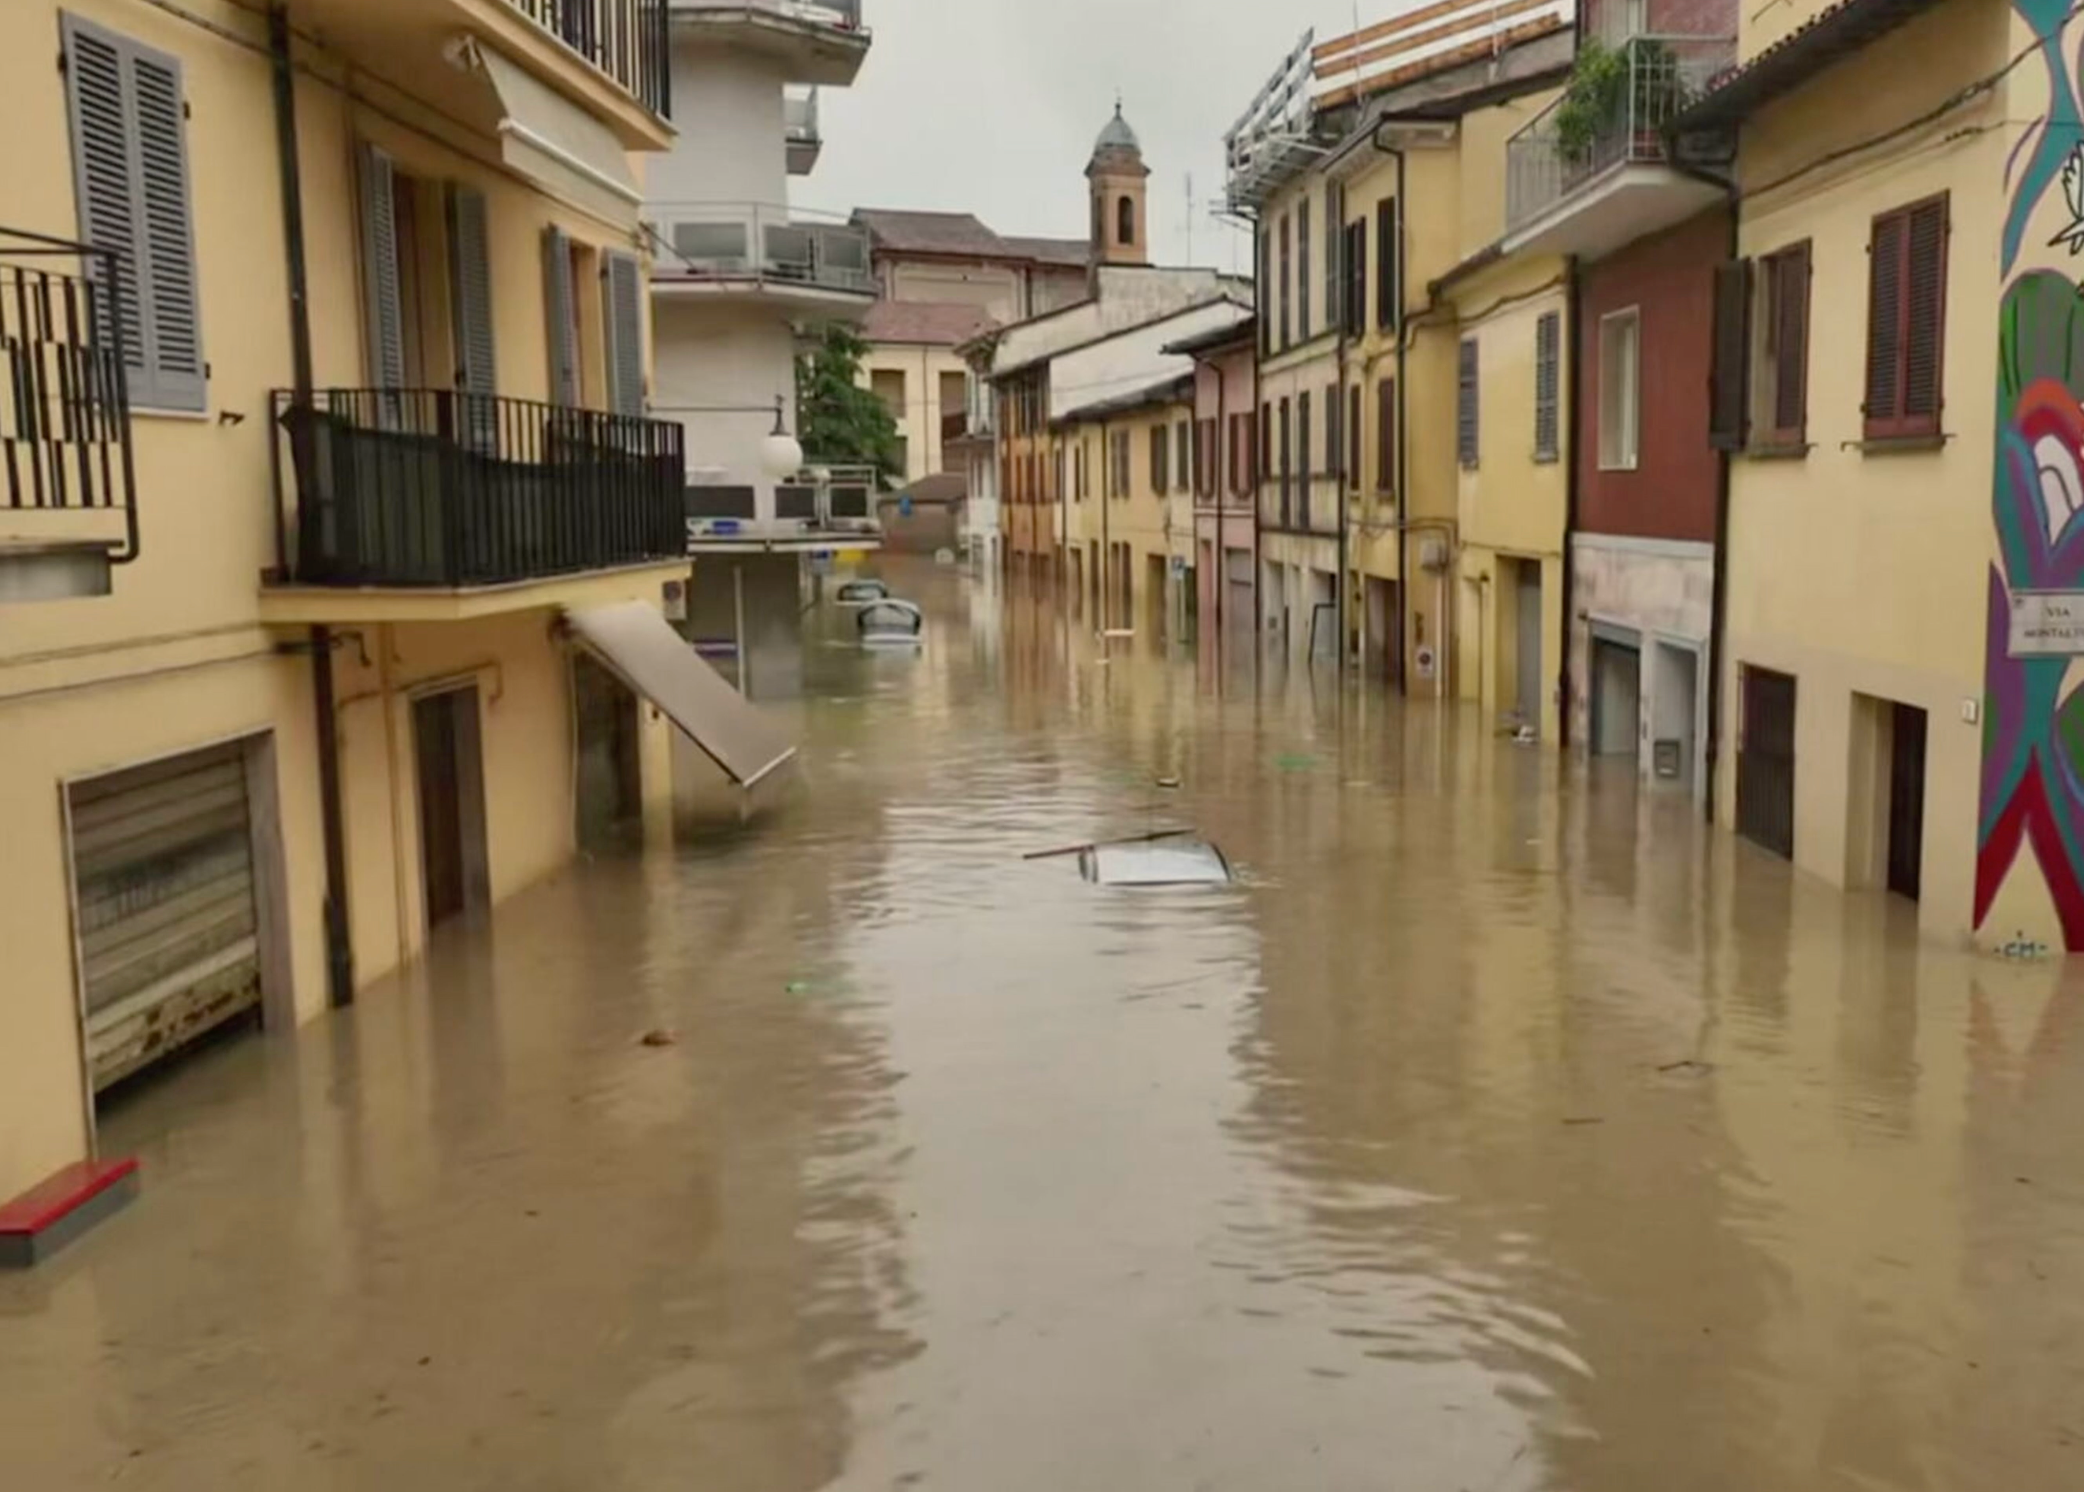 In Emilia Romagna the soil is not able to drain water